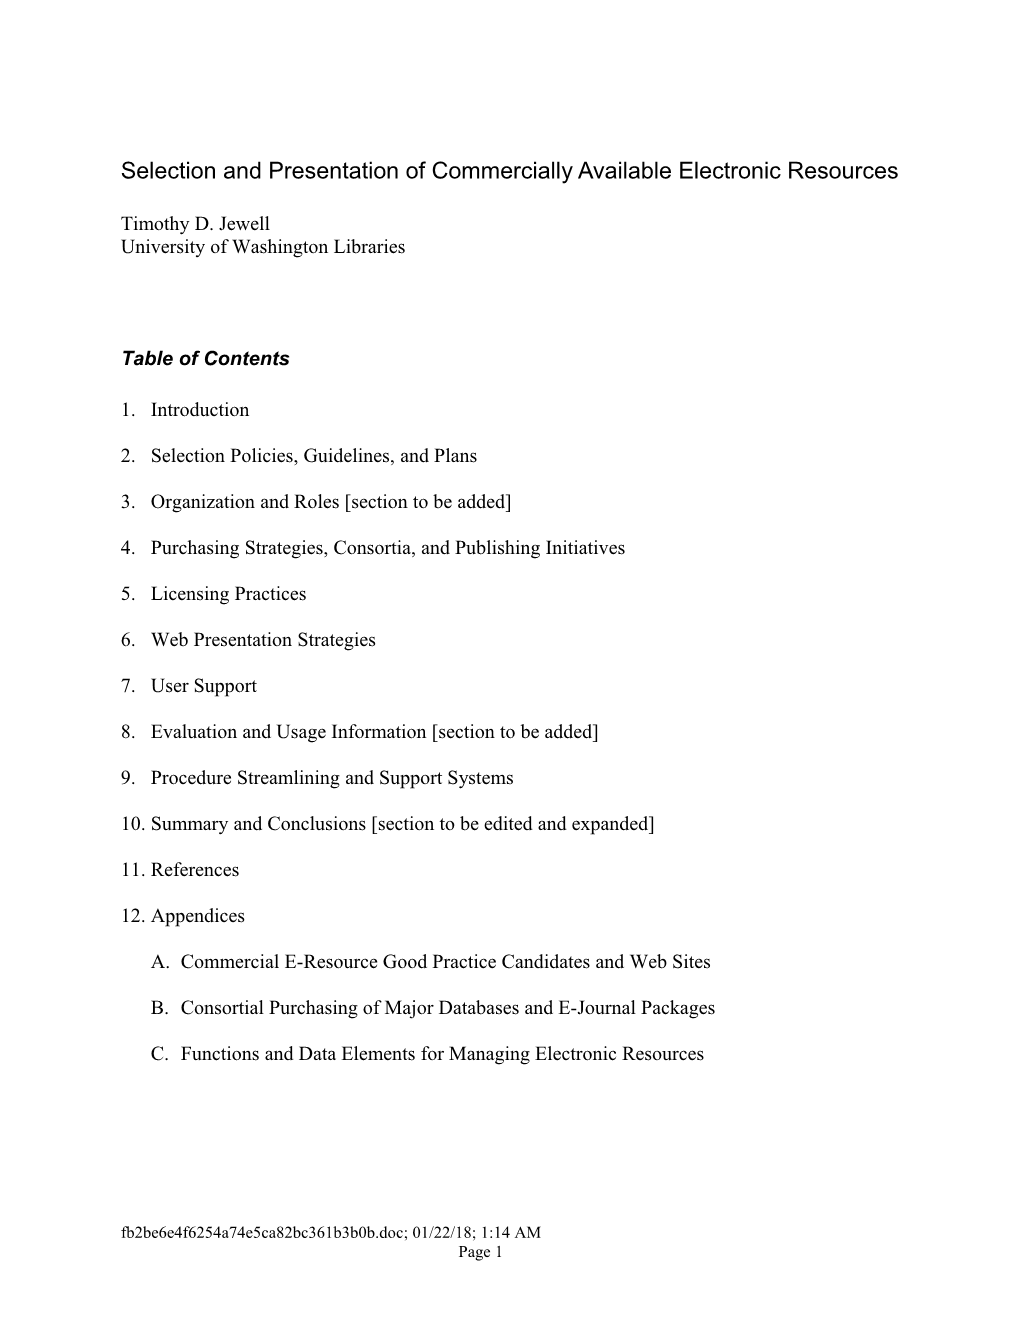 Selection and Presentation of Commercially Available Electronic Resources